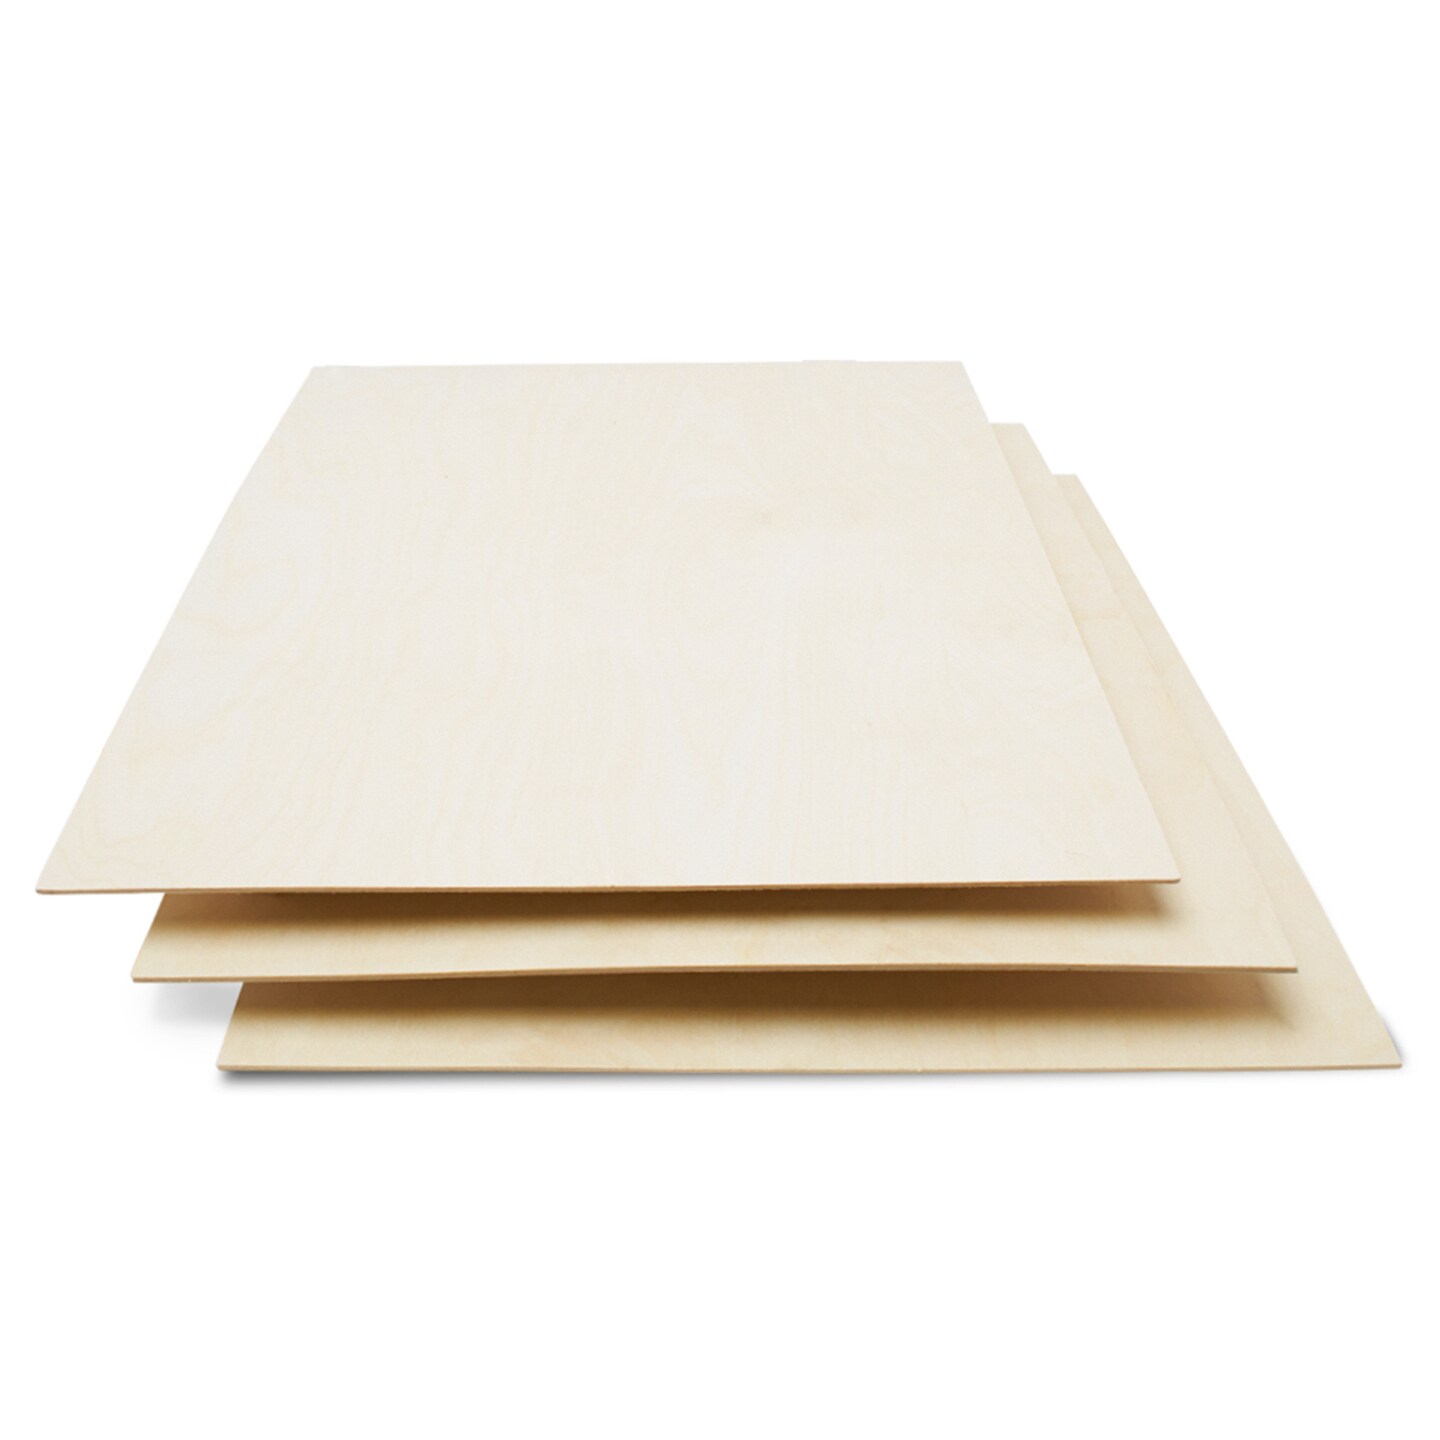 Baltic Birch Plywood, 18 x 24 Inch, B/BB Grade Sheets, 1/4 or 1/8 Inch Thick| Woodpeckers